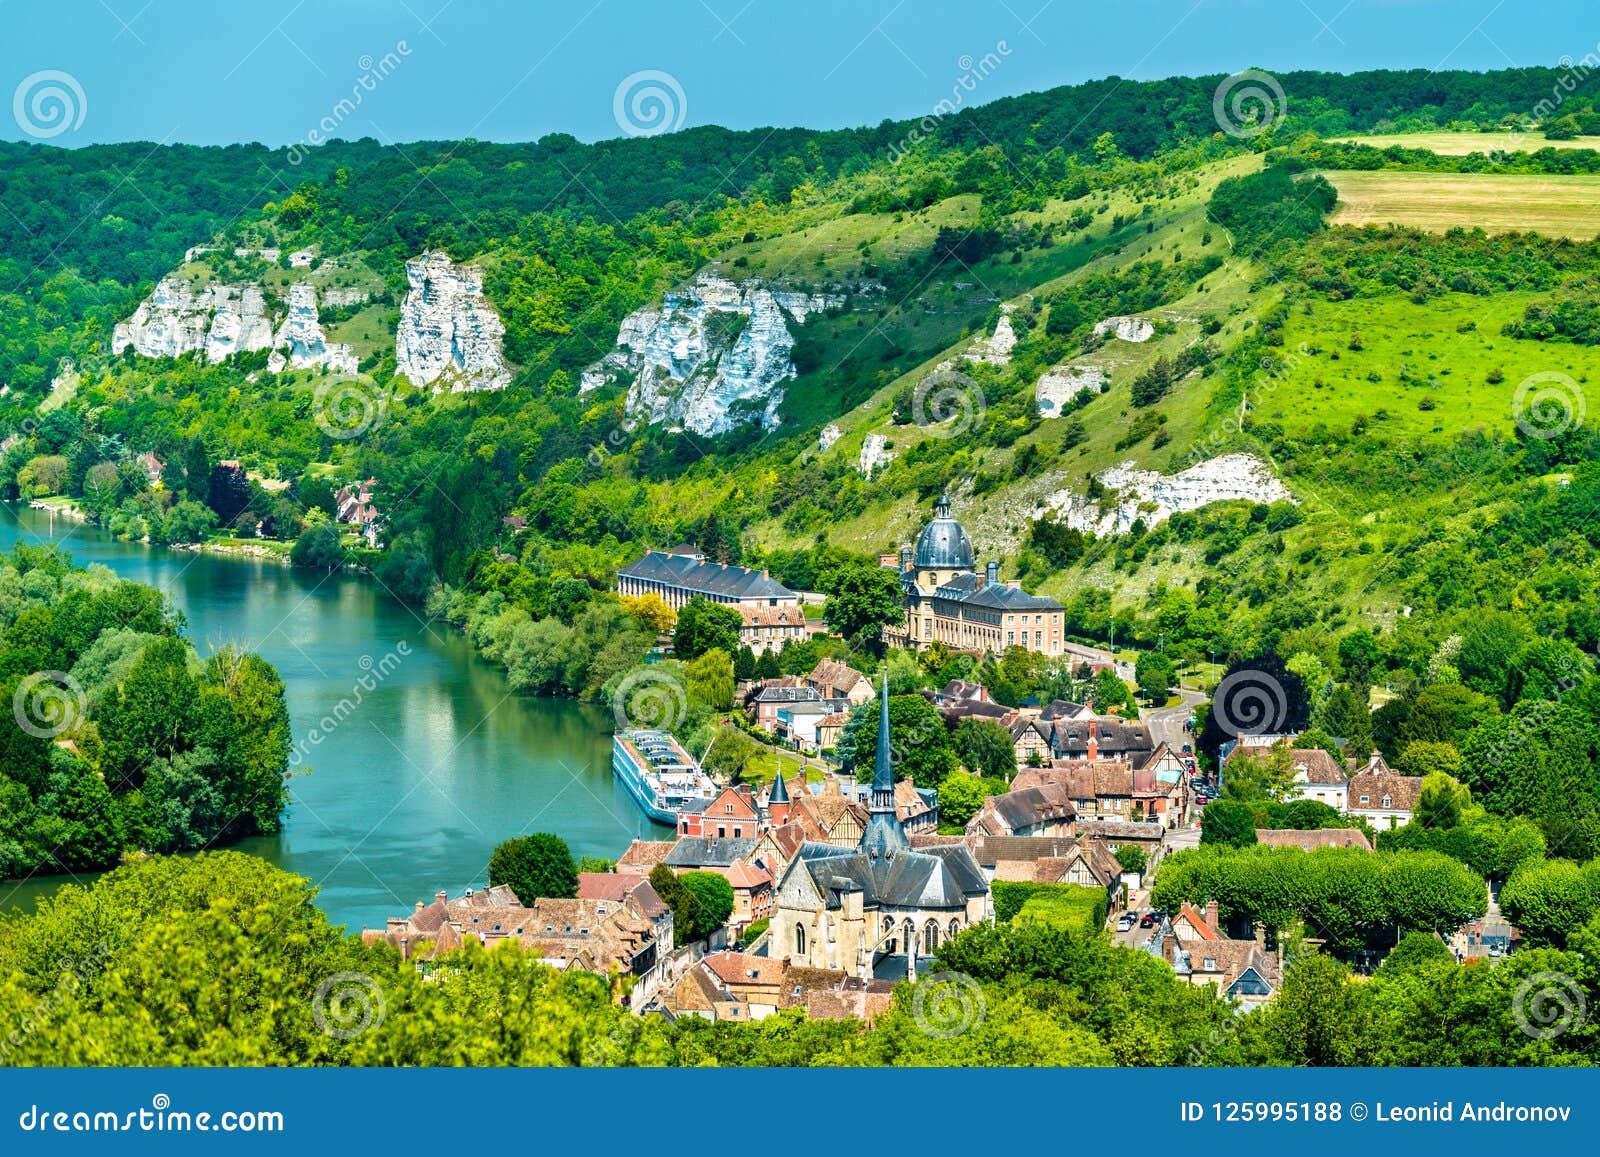 les andelys commune on the banks of the seine in france